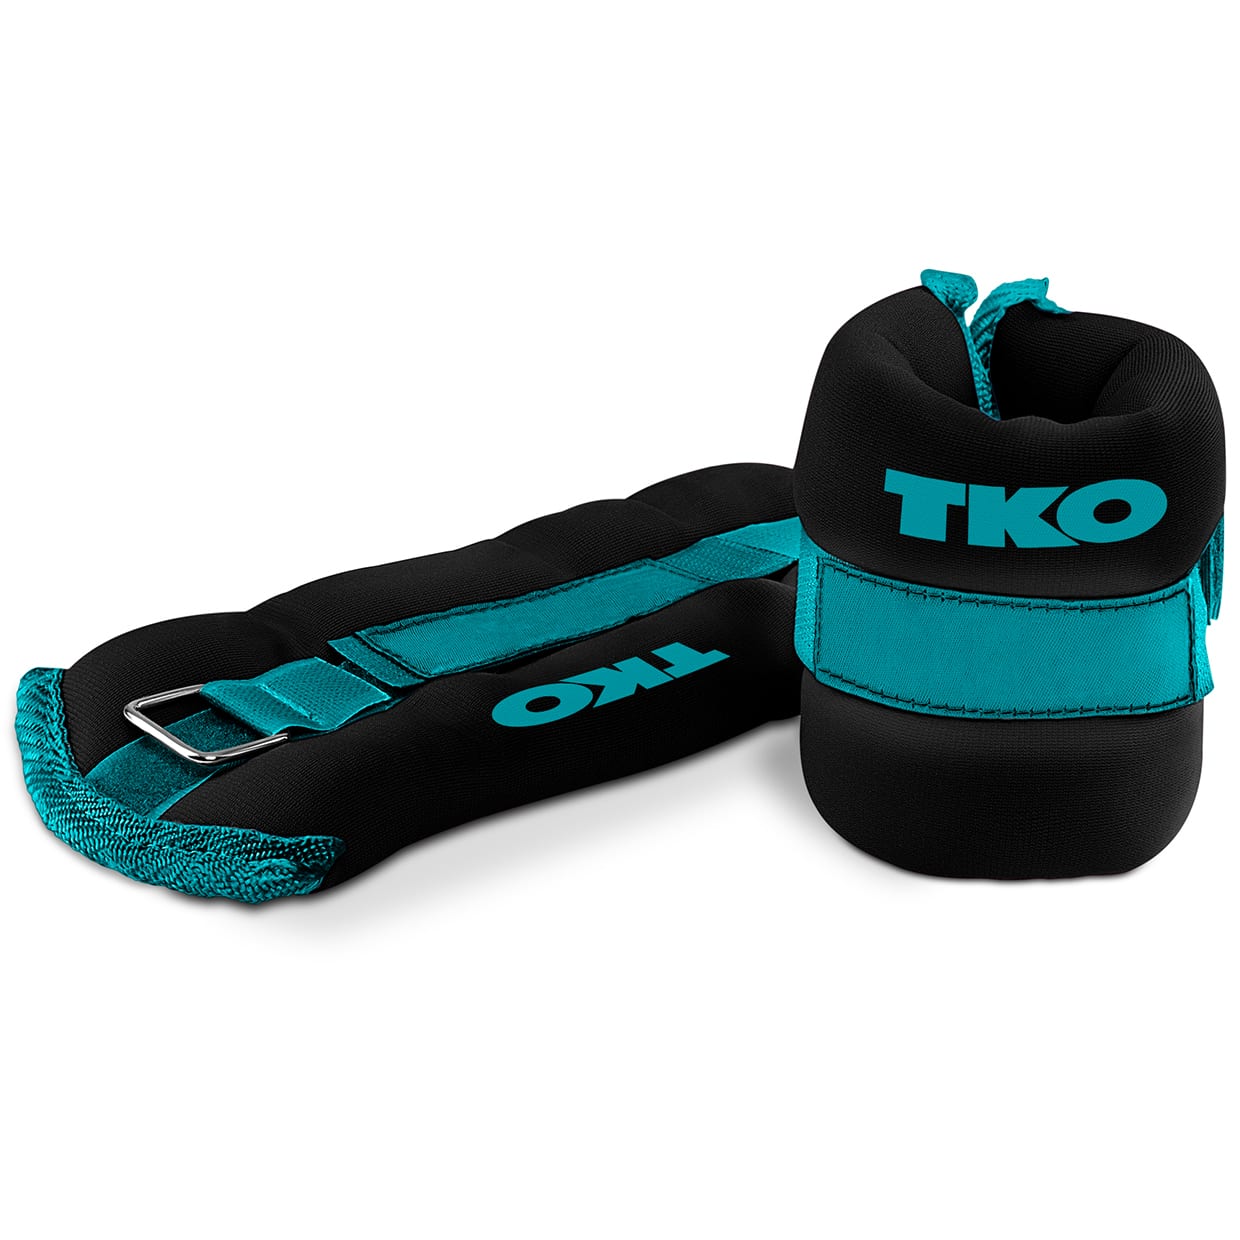 TKO Ankle/Wrist Weights in 2 lb or 5 lb (2 Piece Set) on white.